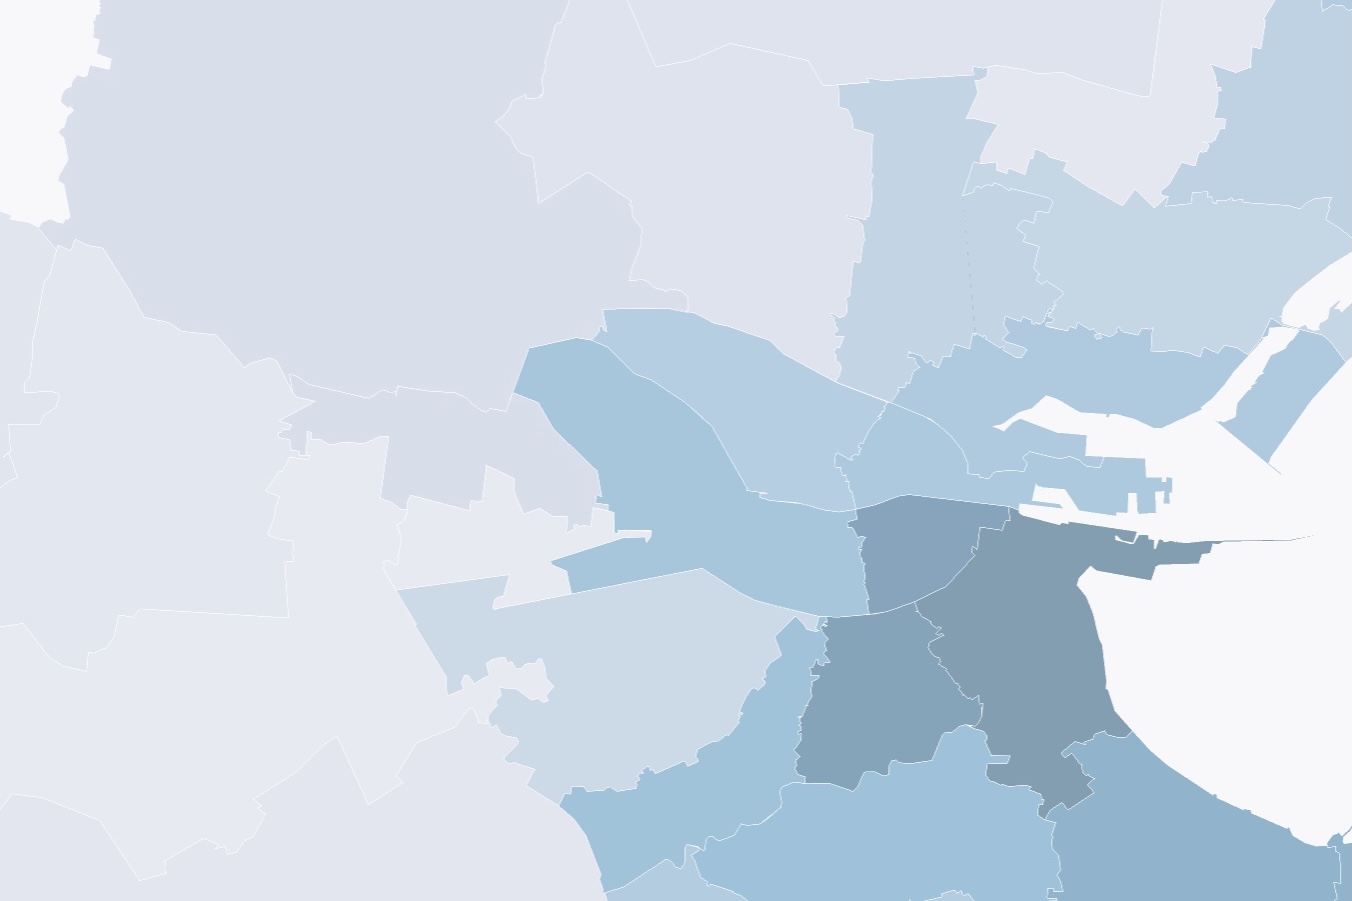 Map of Dublin showing neighborhoods shaded based on house prices